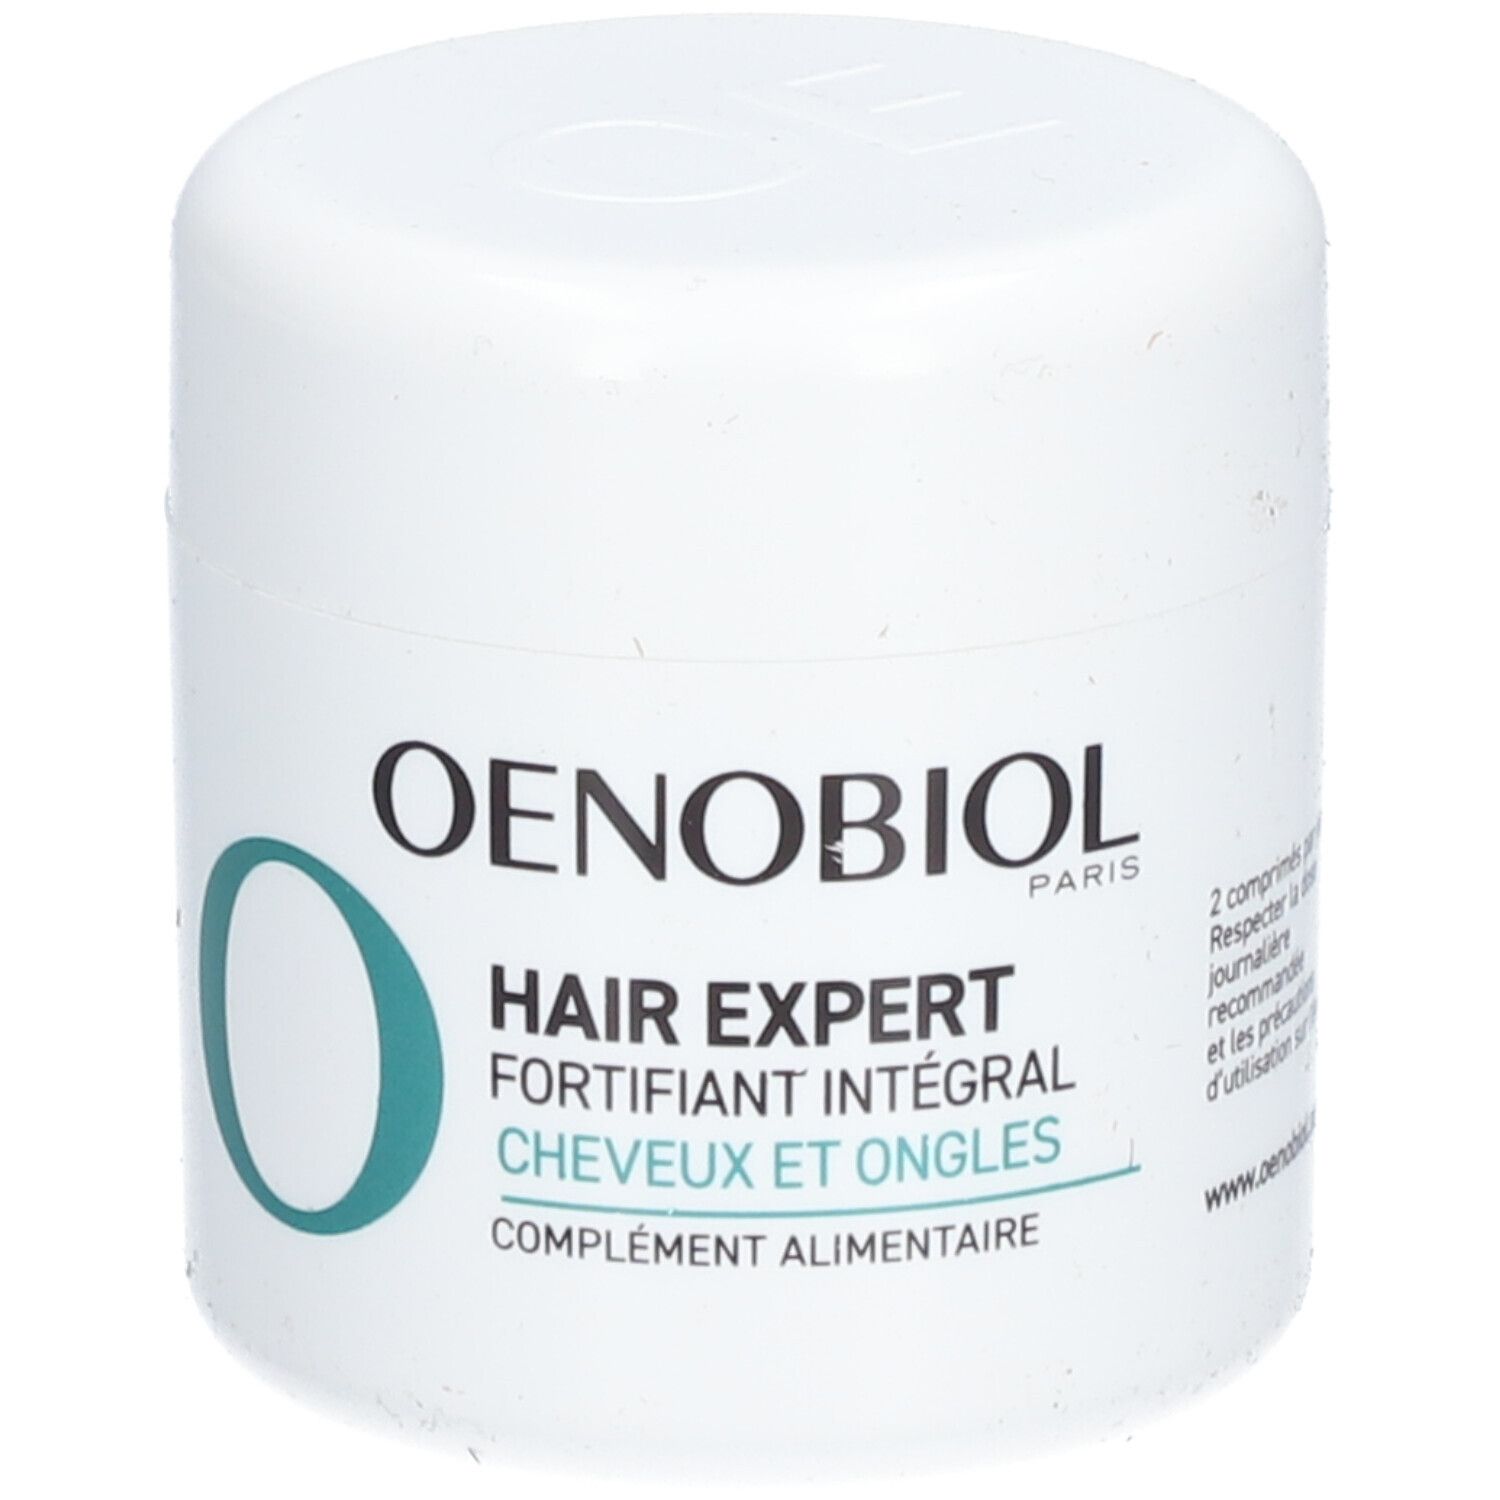 Oenobiol Hair expert Fortifiant intégral Cheveux et ongles